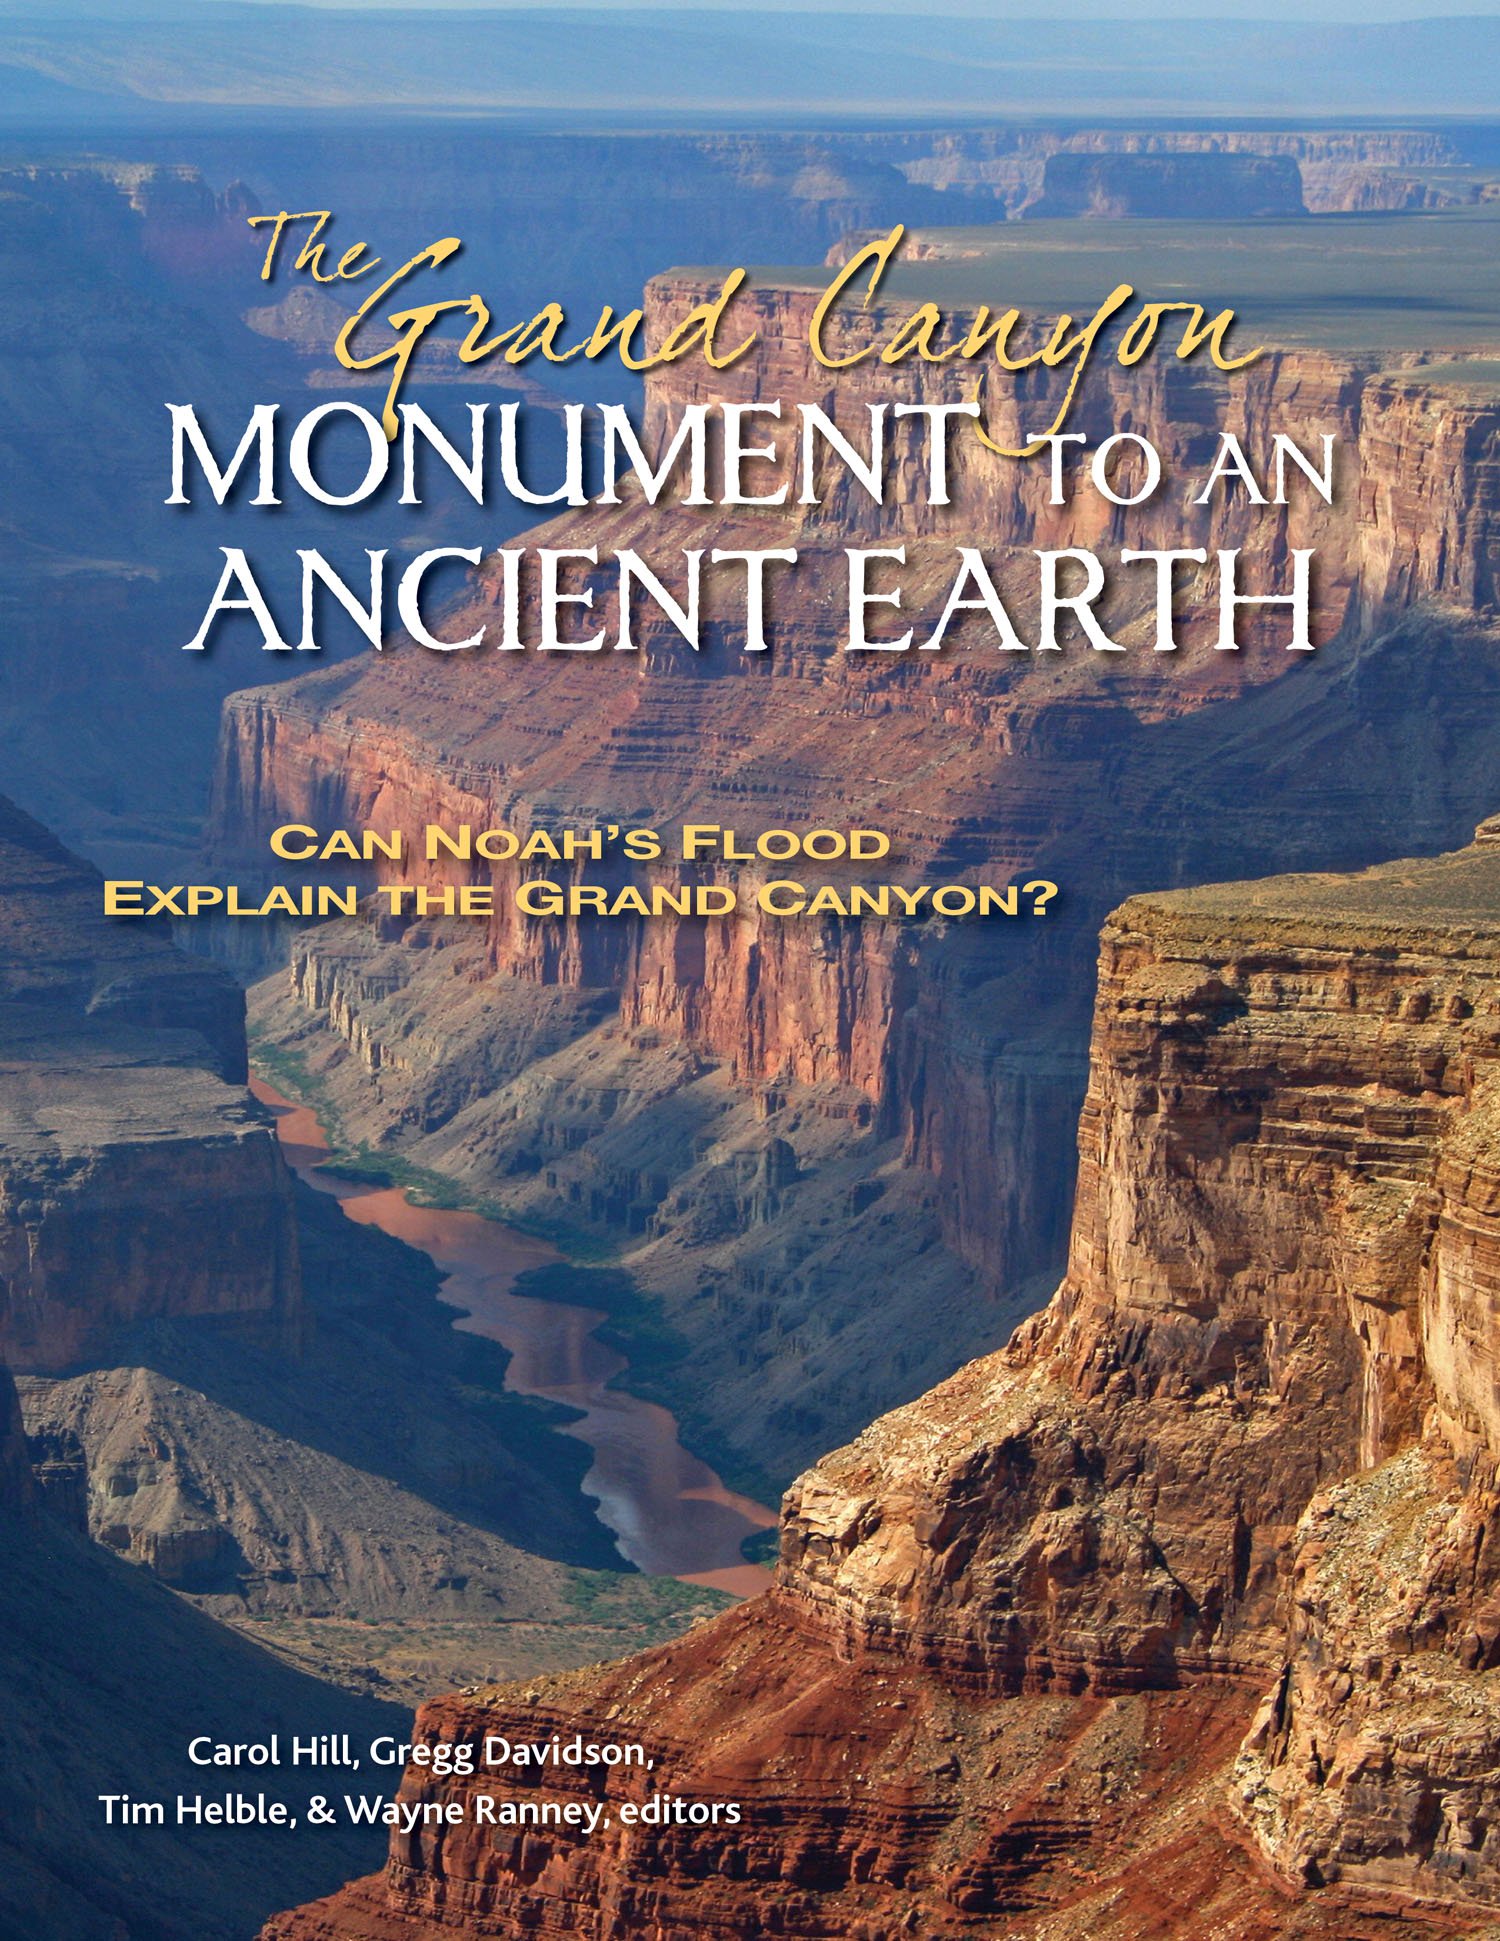 Amazon.com: The Grand Canyon, Monument to an Ancient Earth: Can ...